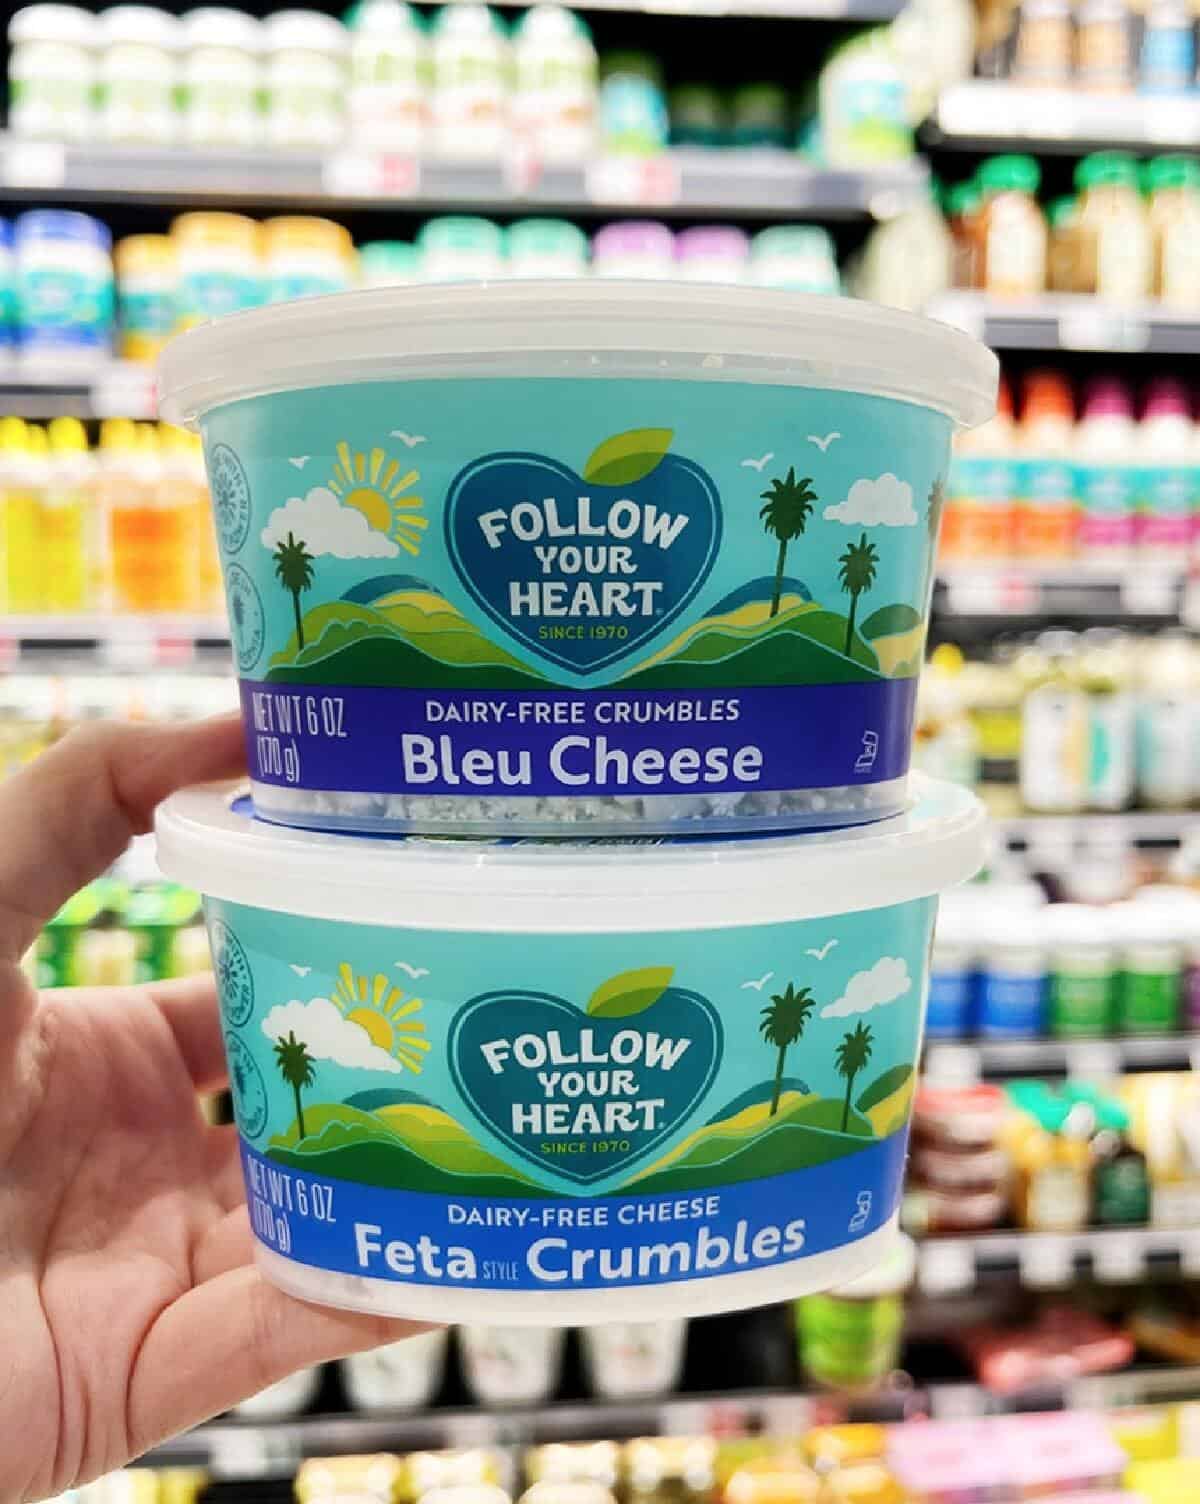 A hand holding two plastic tubs of Follow Your Heart Vegan Blue Cheese crumbles against a grocery store shelf background.